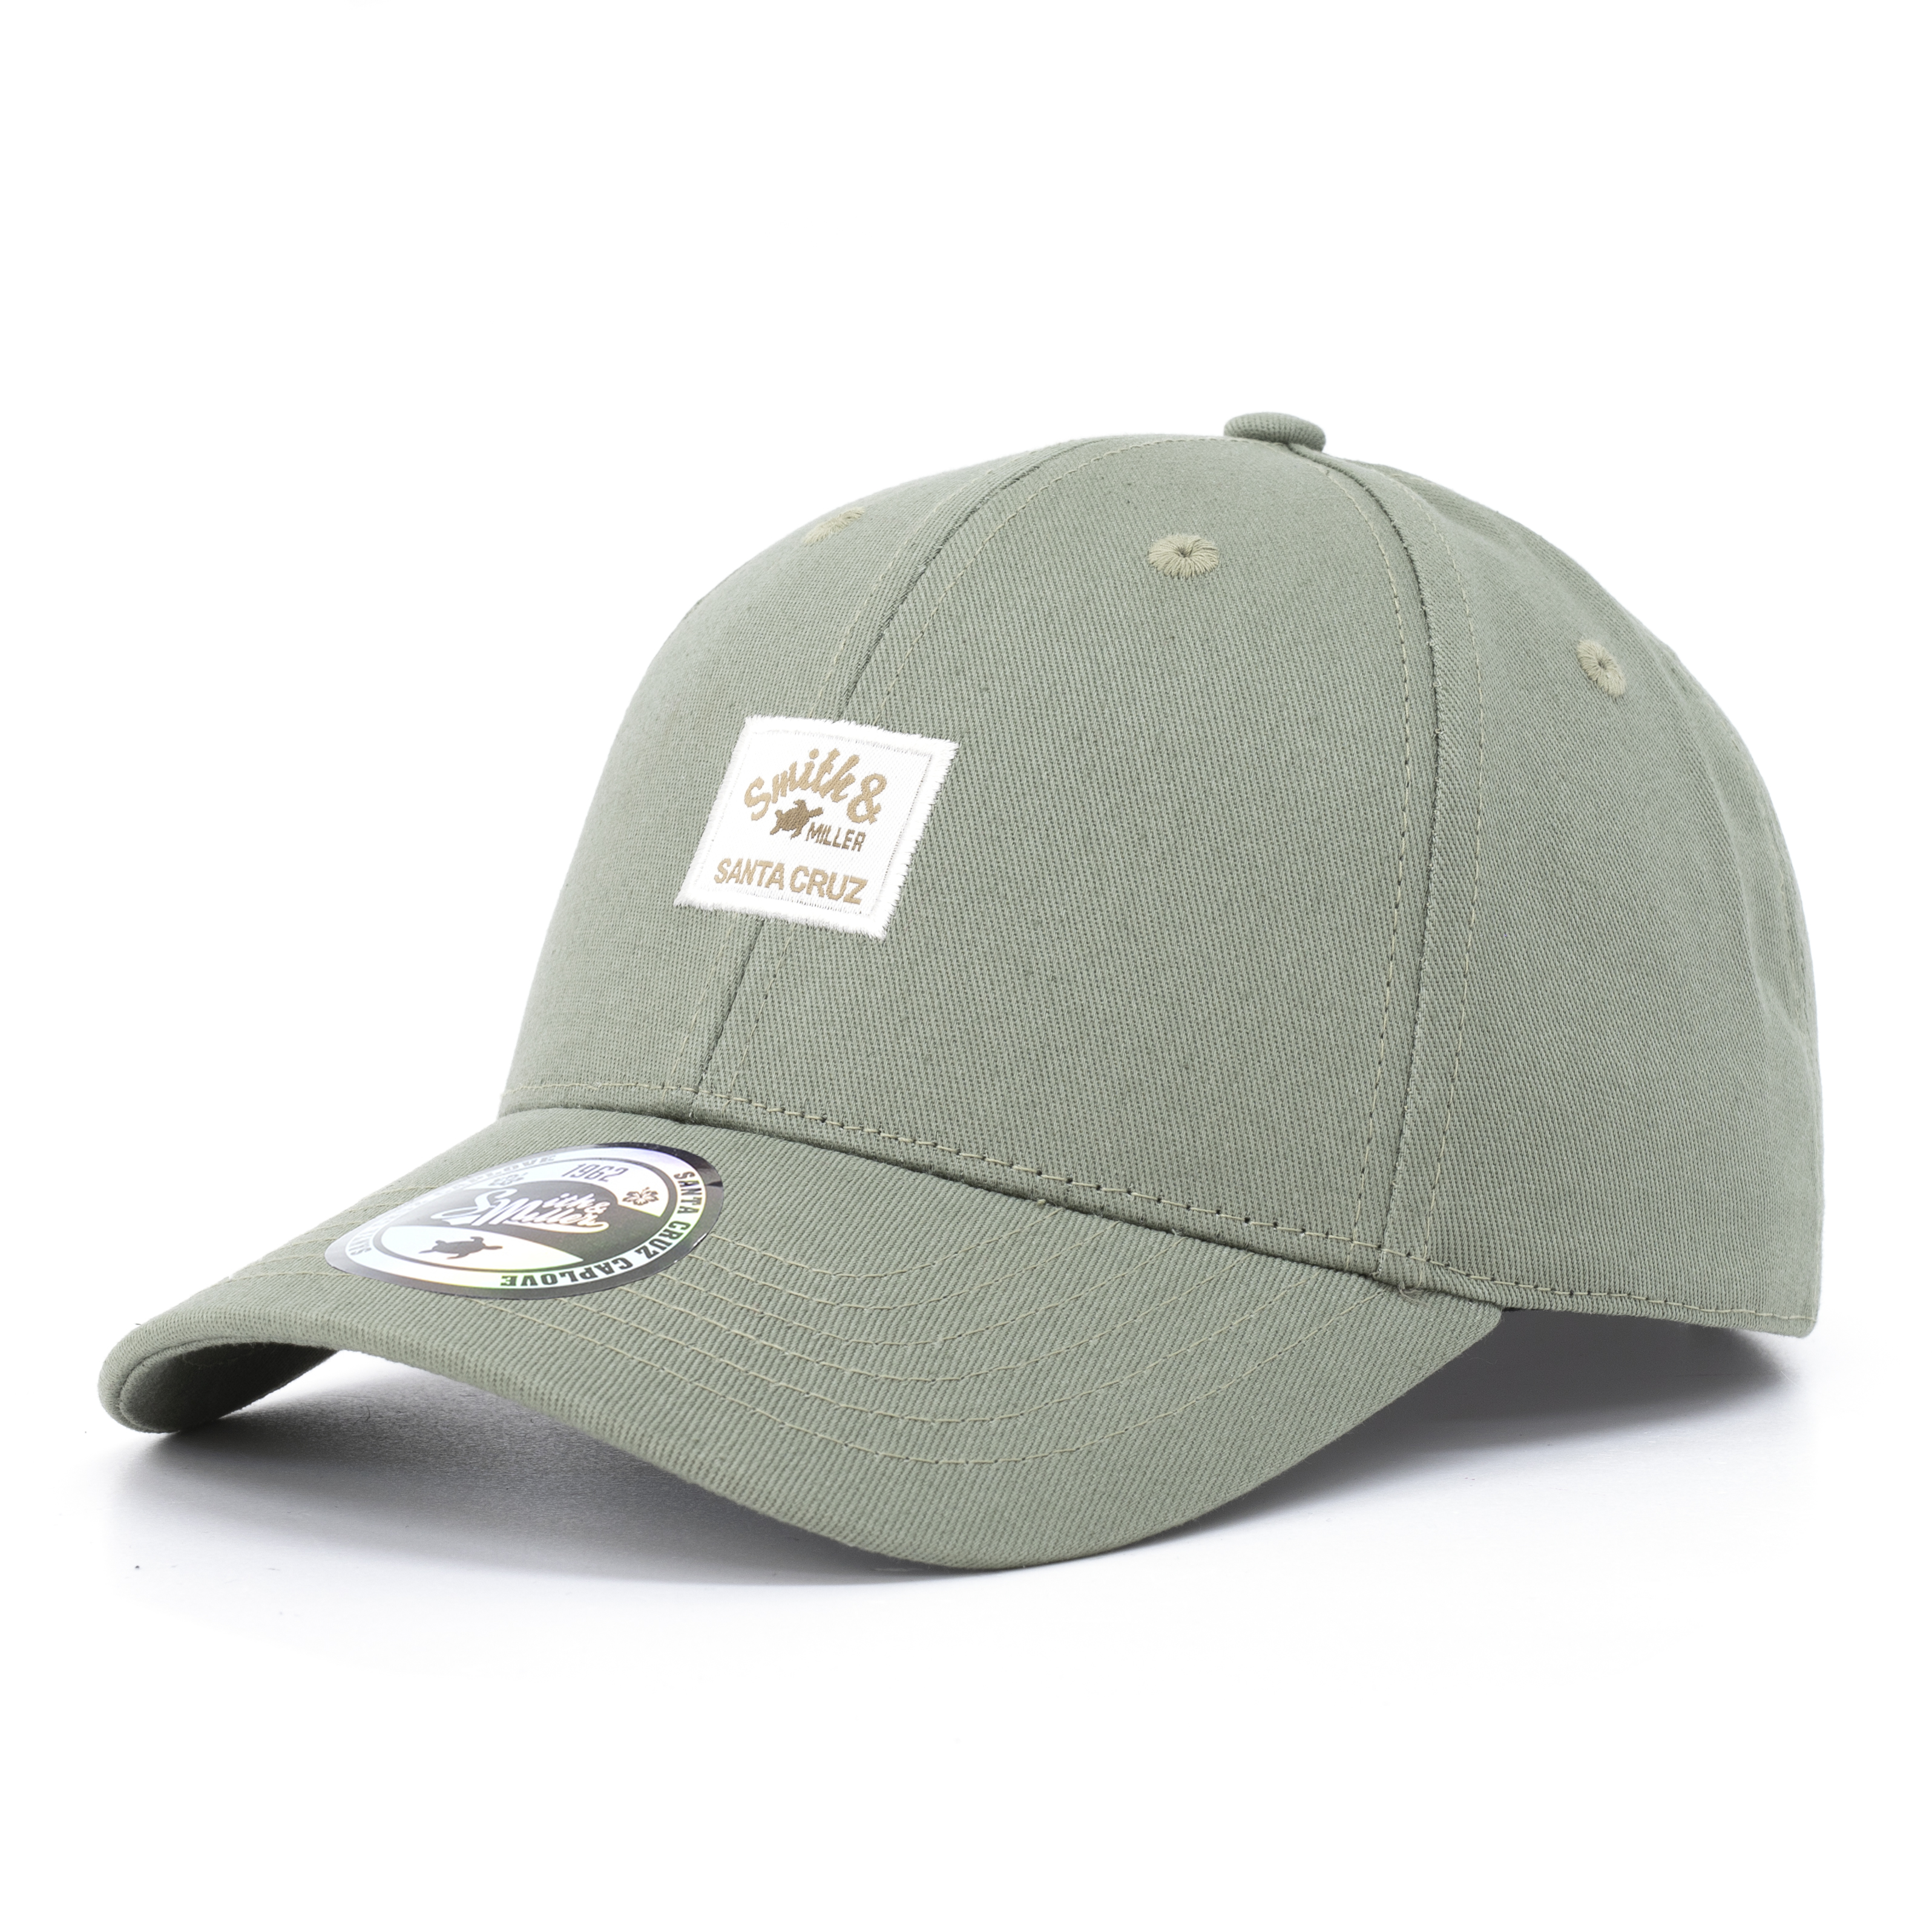 Smith & Miller Reno Unisex Curved Cap, dusty green